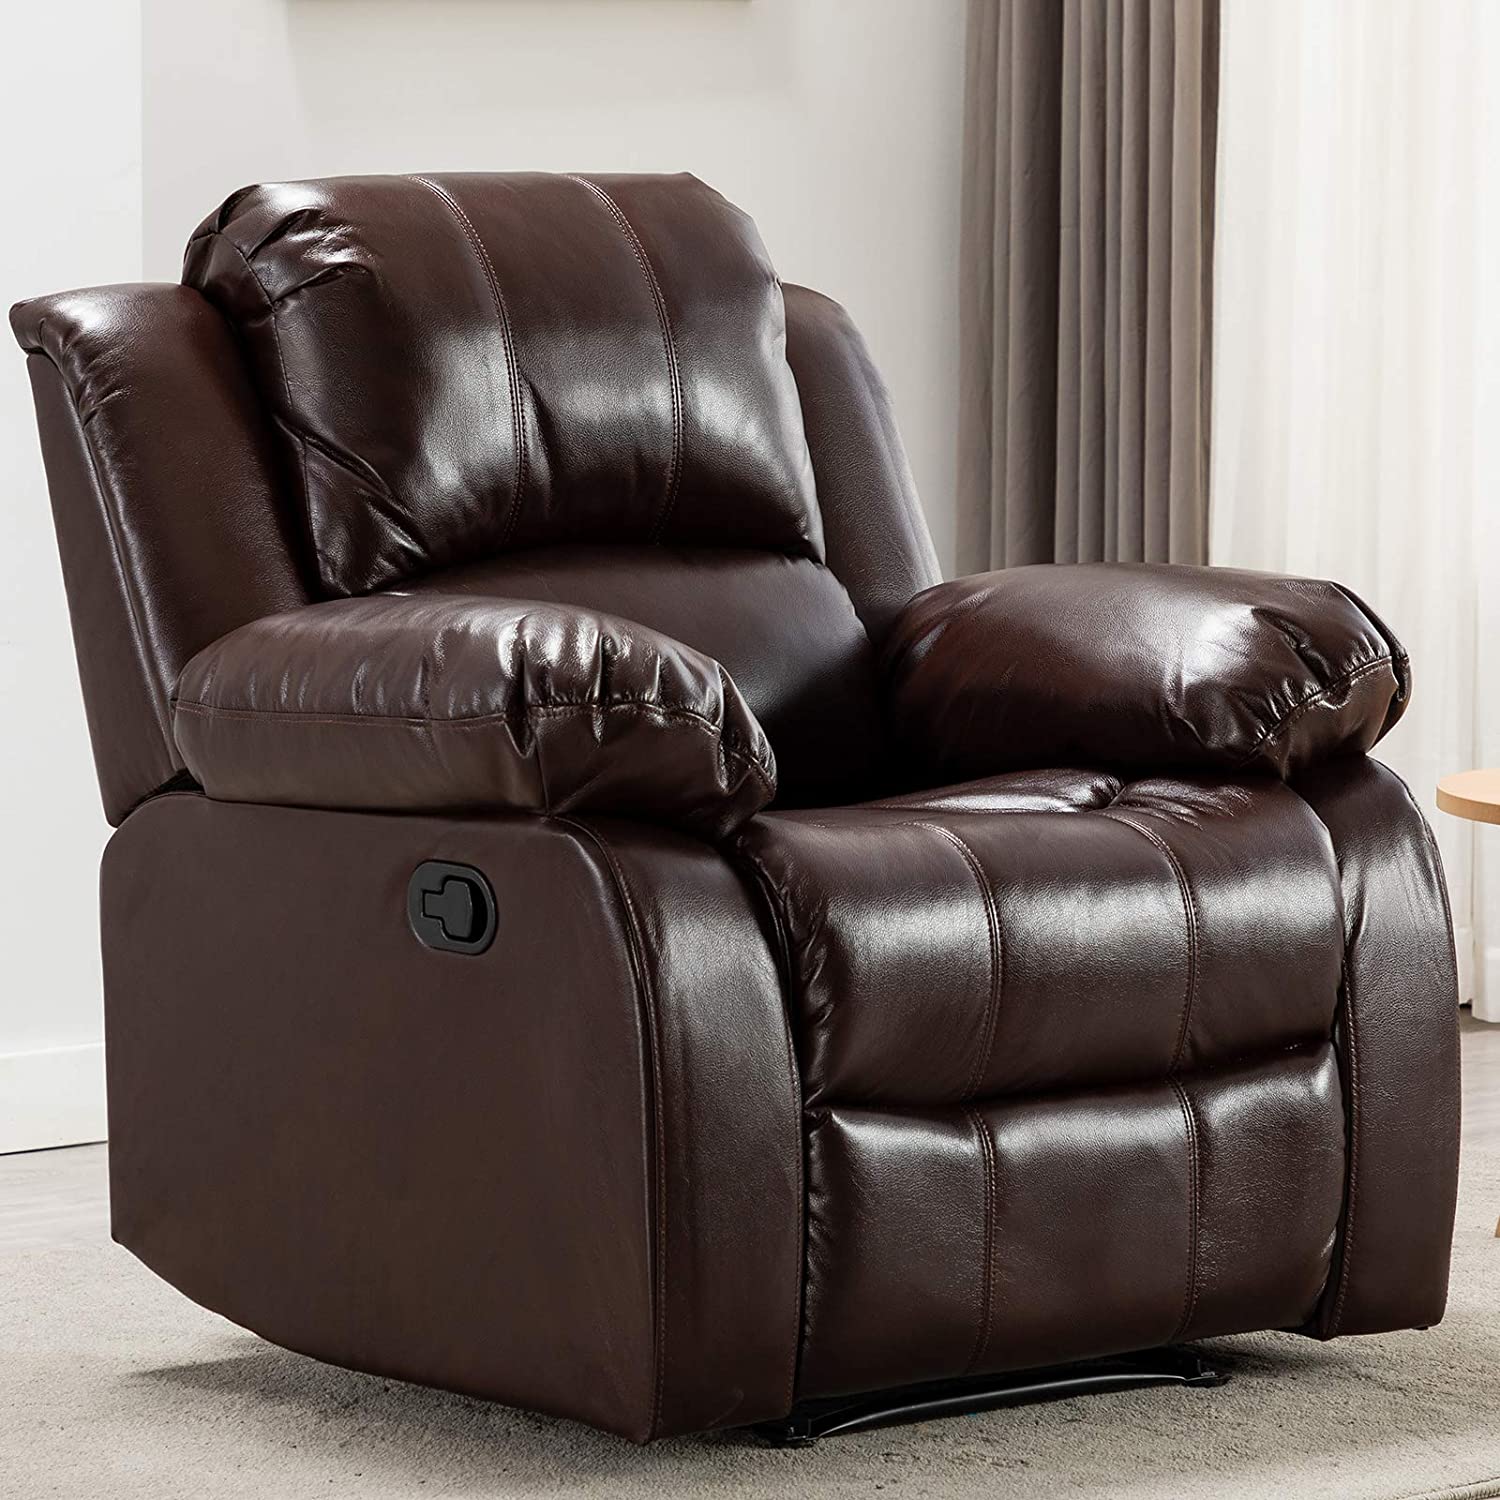 Top 5 Stylish Low Profile Leather Recliner Chairs - 2021 • Recliners Guide